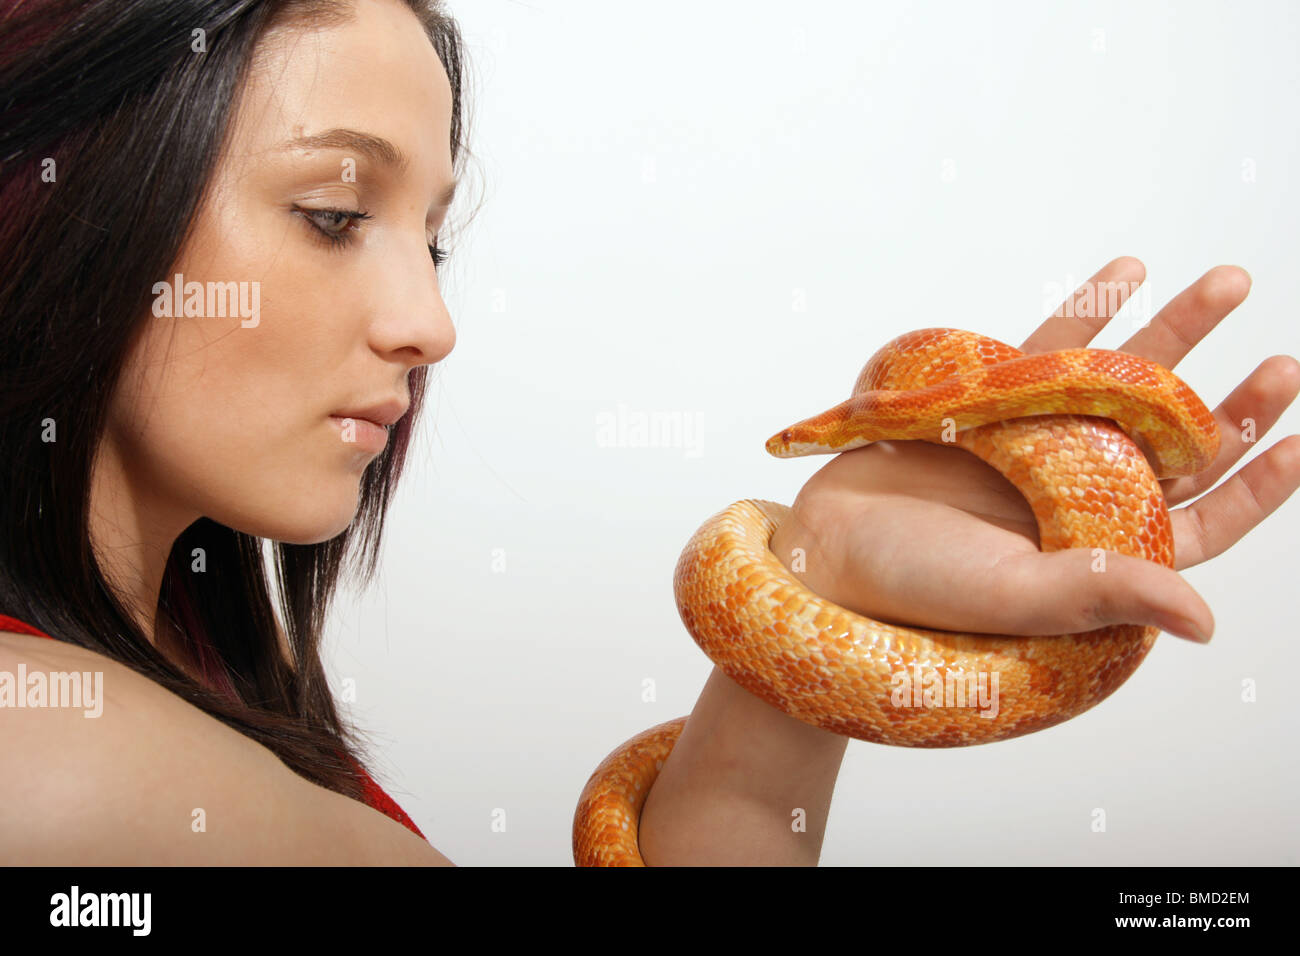 A Woman looking at a corn snake held in her hand Stock Photo